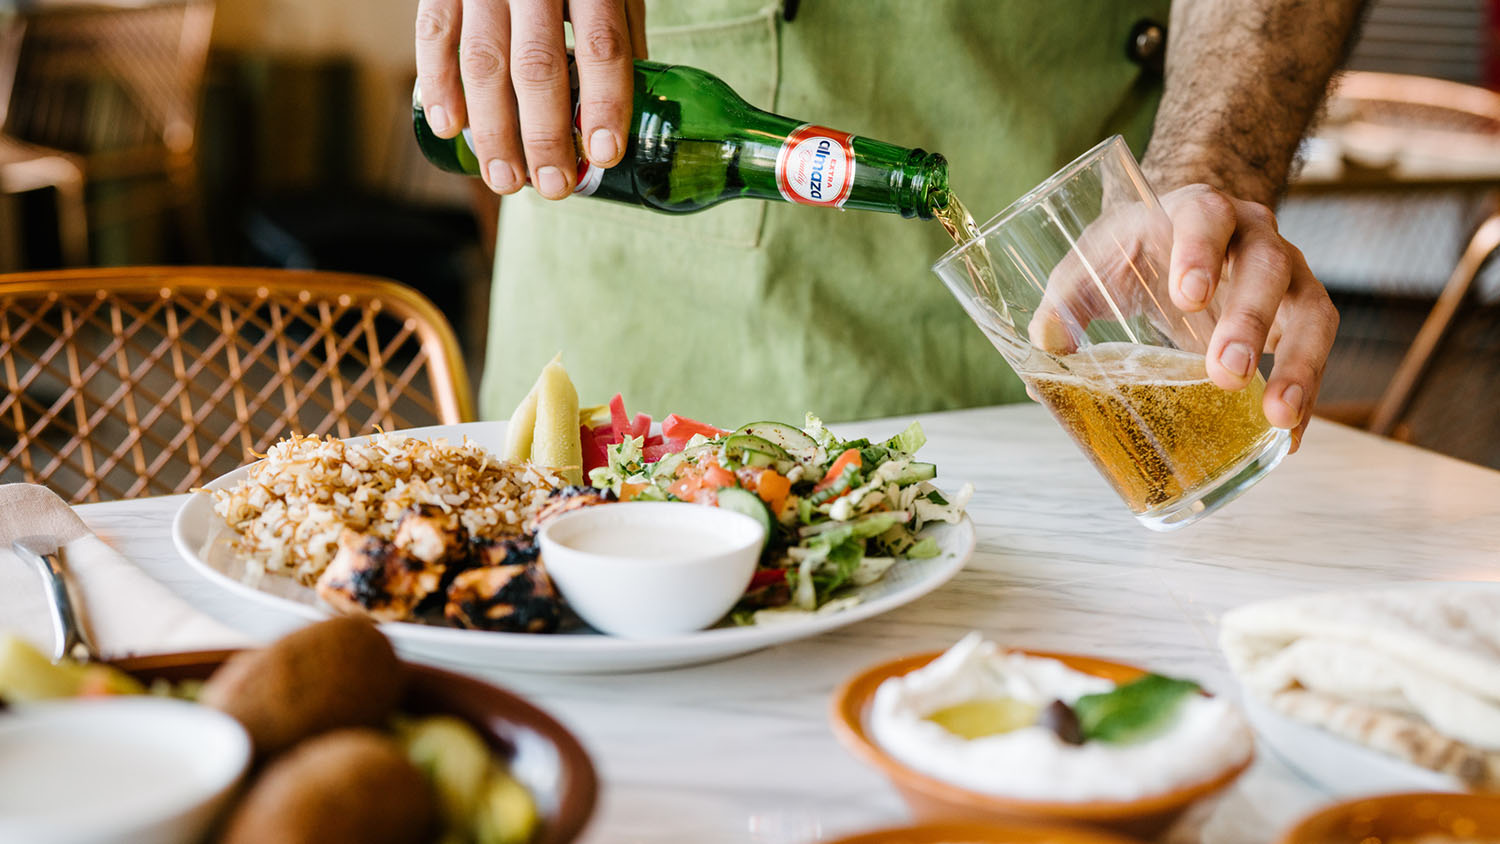 Multiple dishes filled with beautiful Middle Eastern foods in the foreground, with a hand pouring a beer into a glass in the background